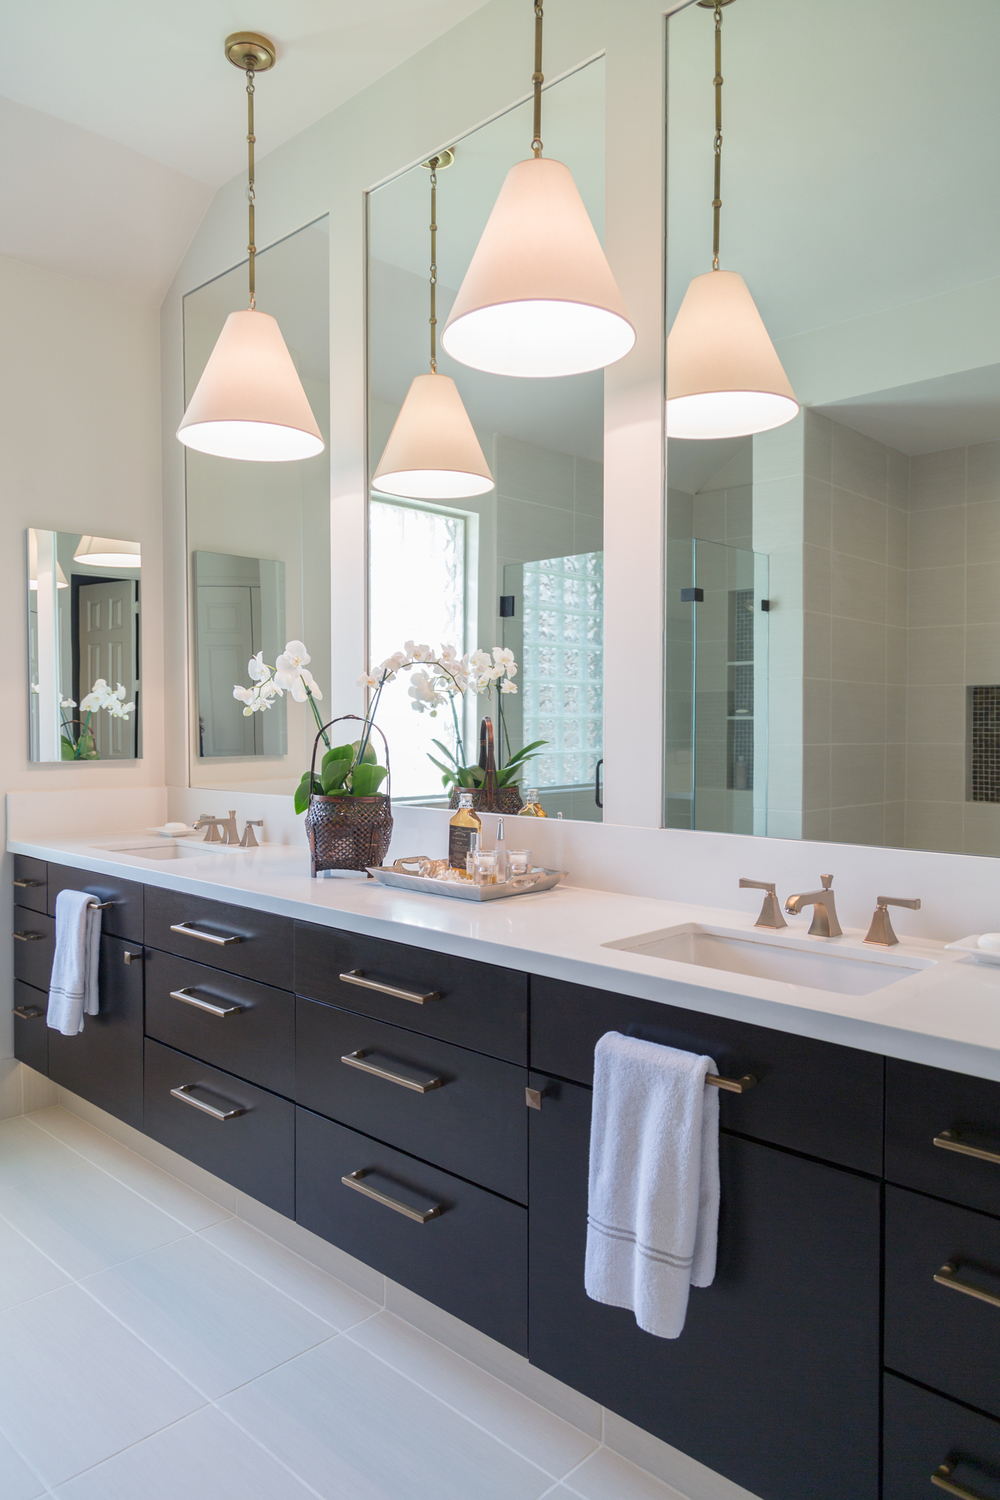 BEFORE & AFTER: A Master Bathroom Remodel Surprises Everyone With